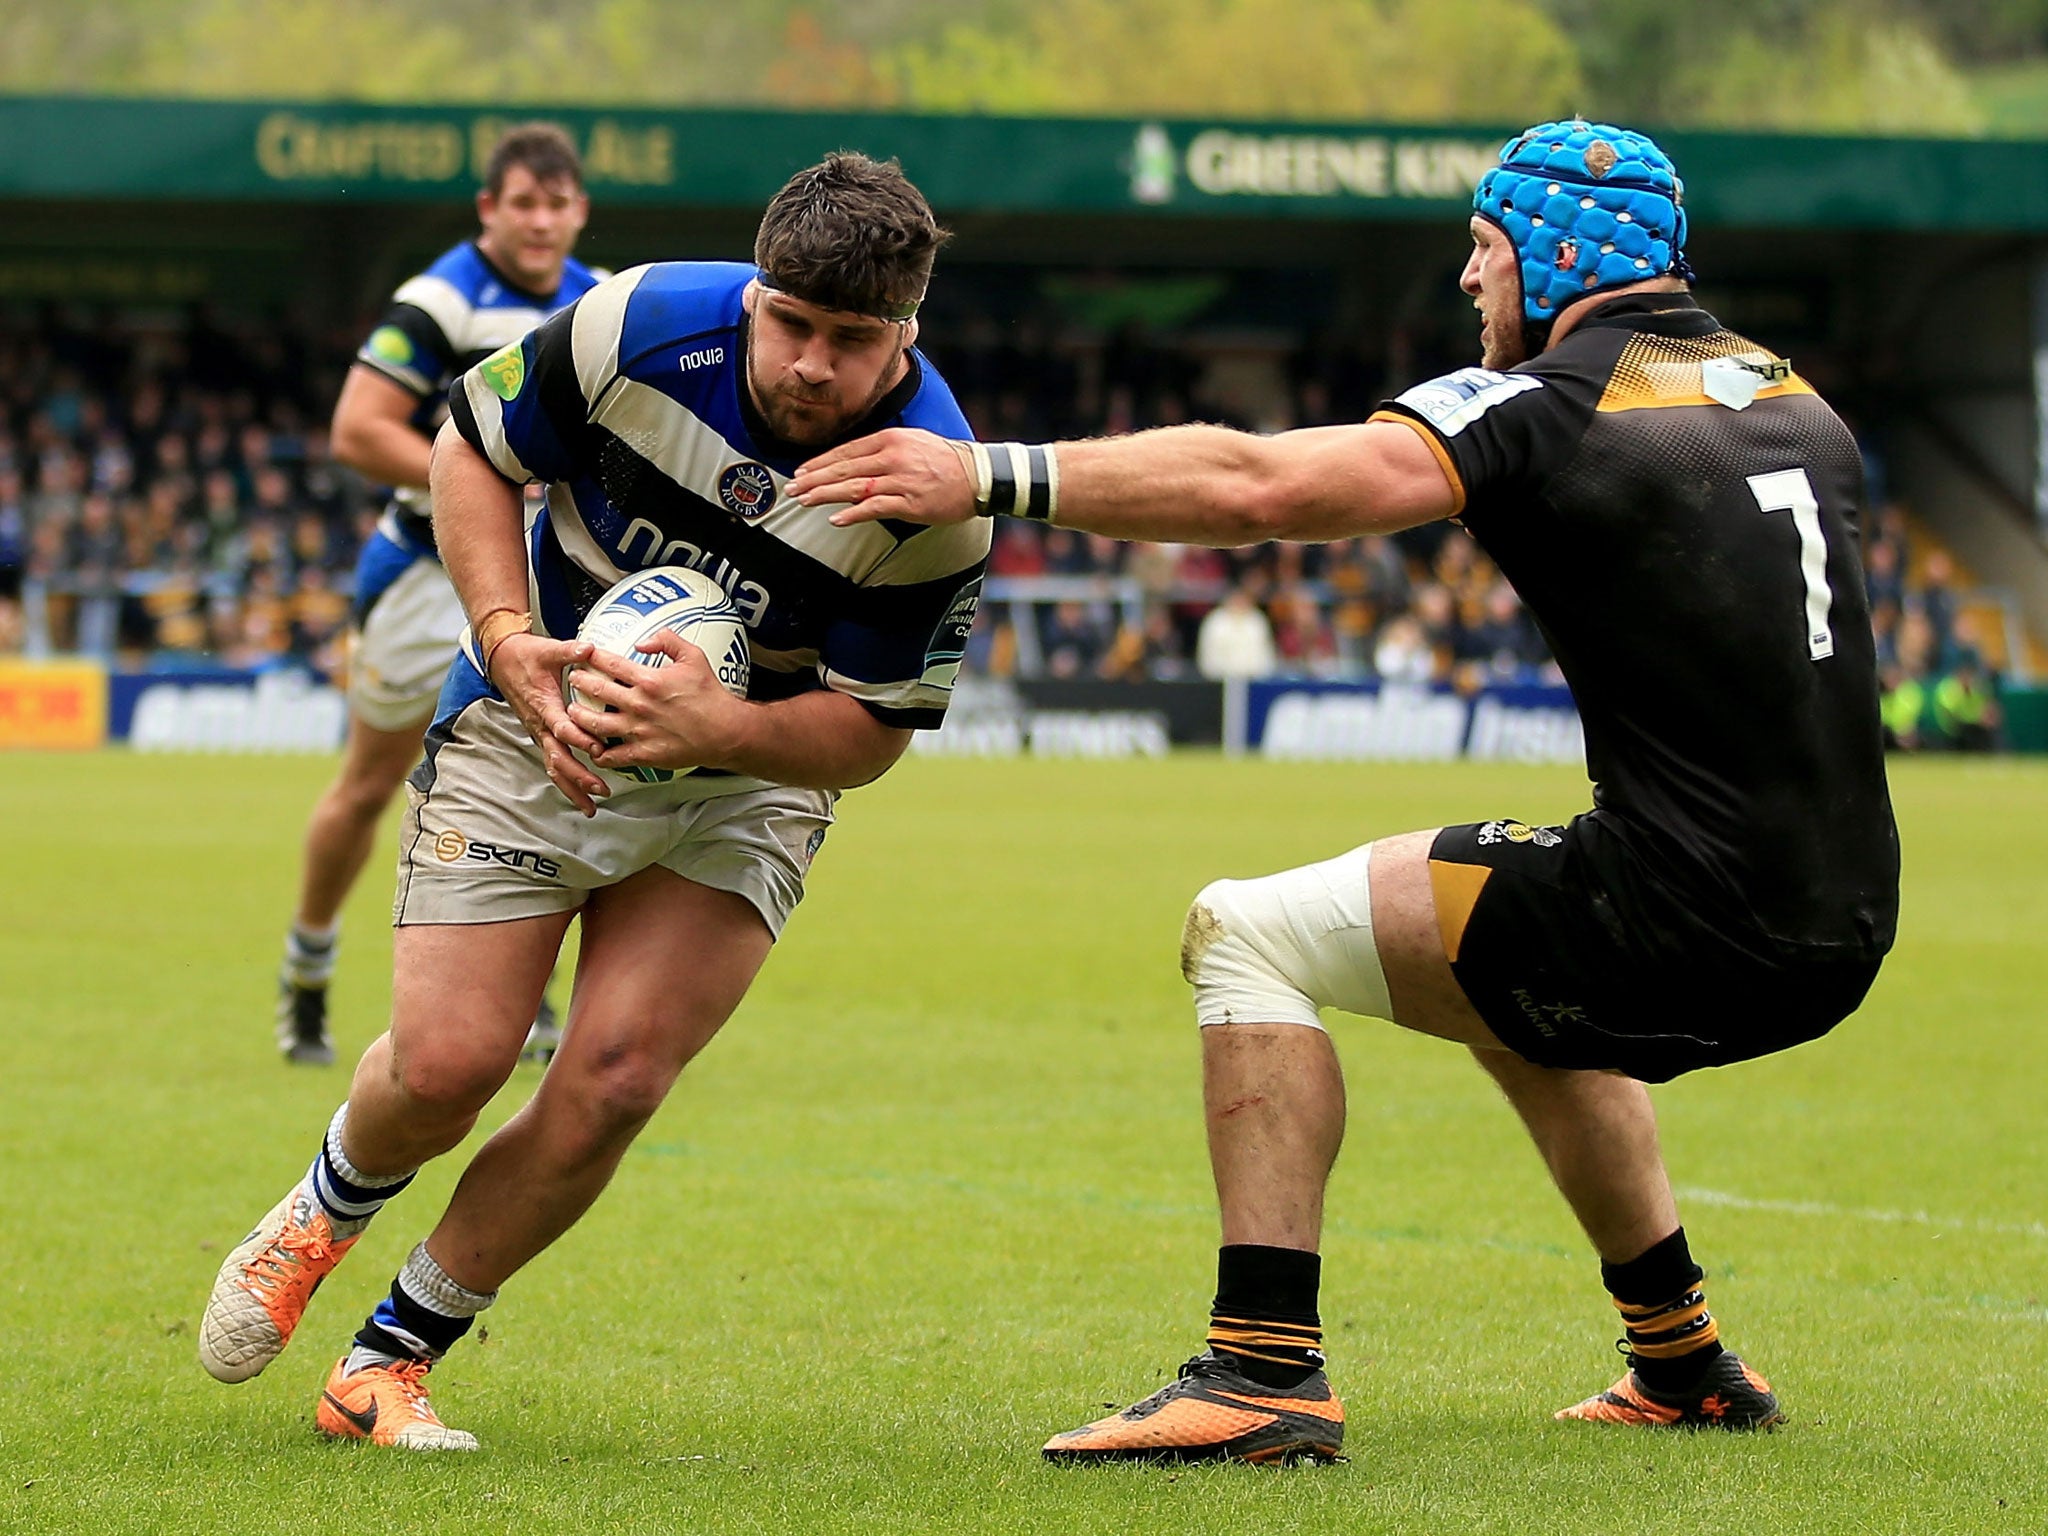 Rob Webber of Bath goes over to score a try after a poor line-out throw by Wasps’ Carlo Festuccia